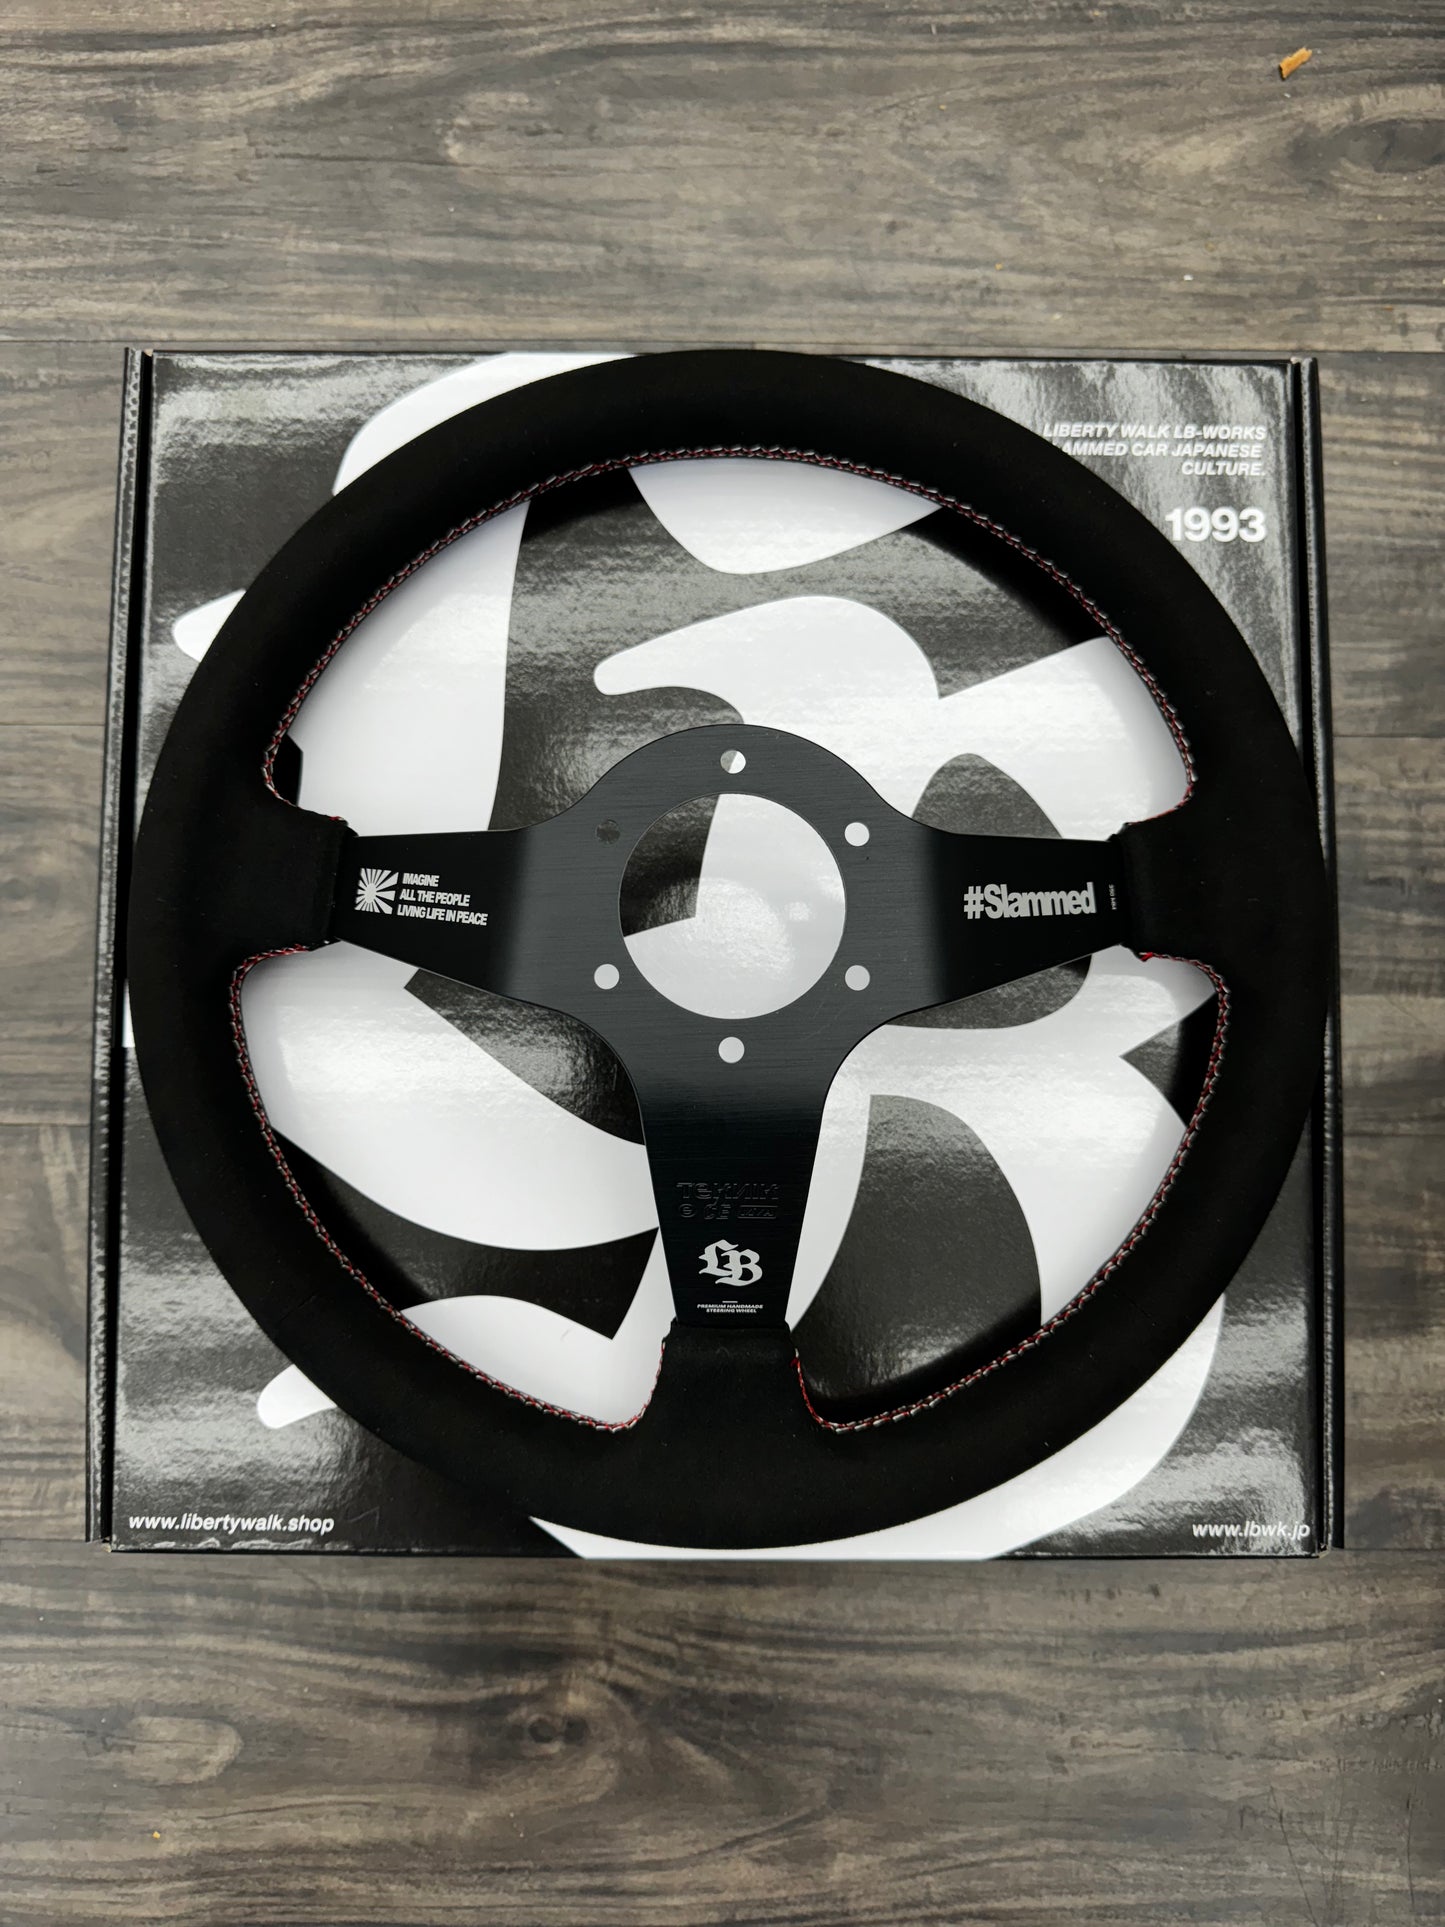 LB Steering Wheel (Limited Edition)